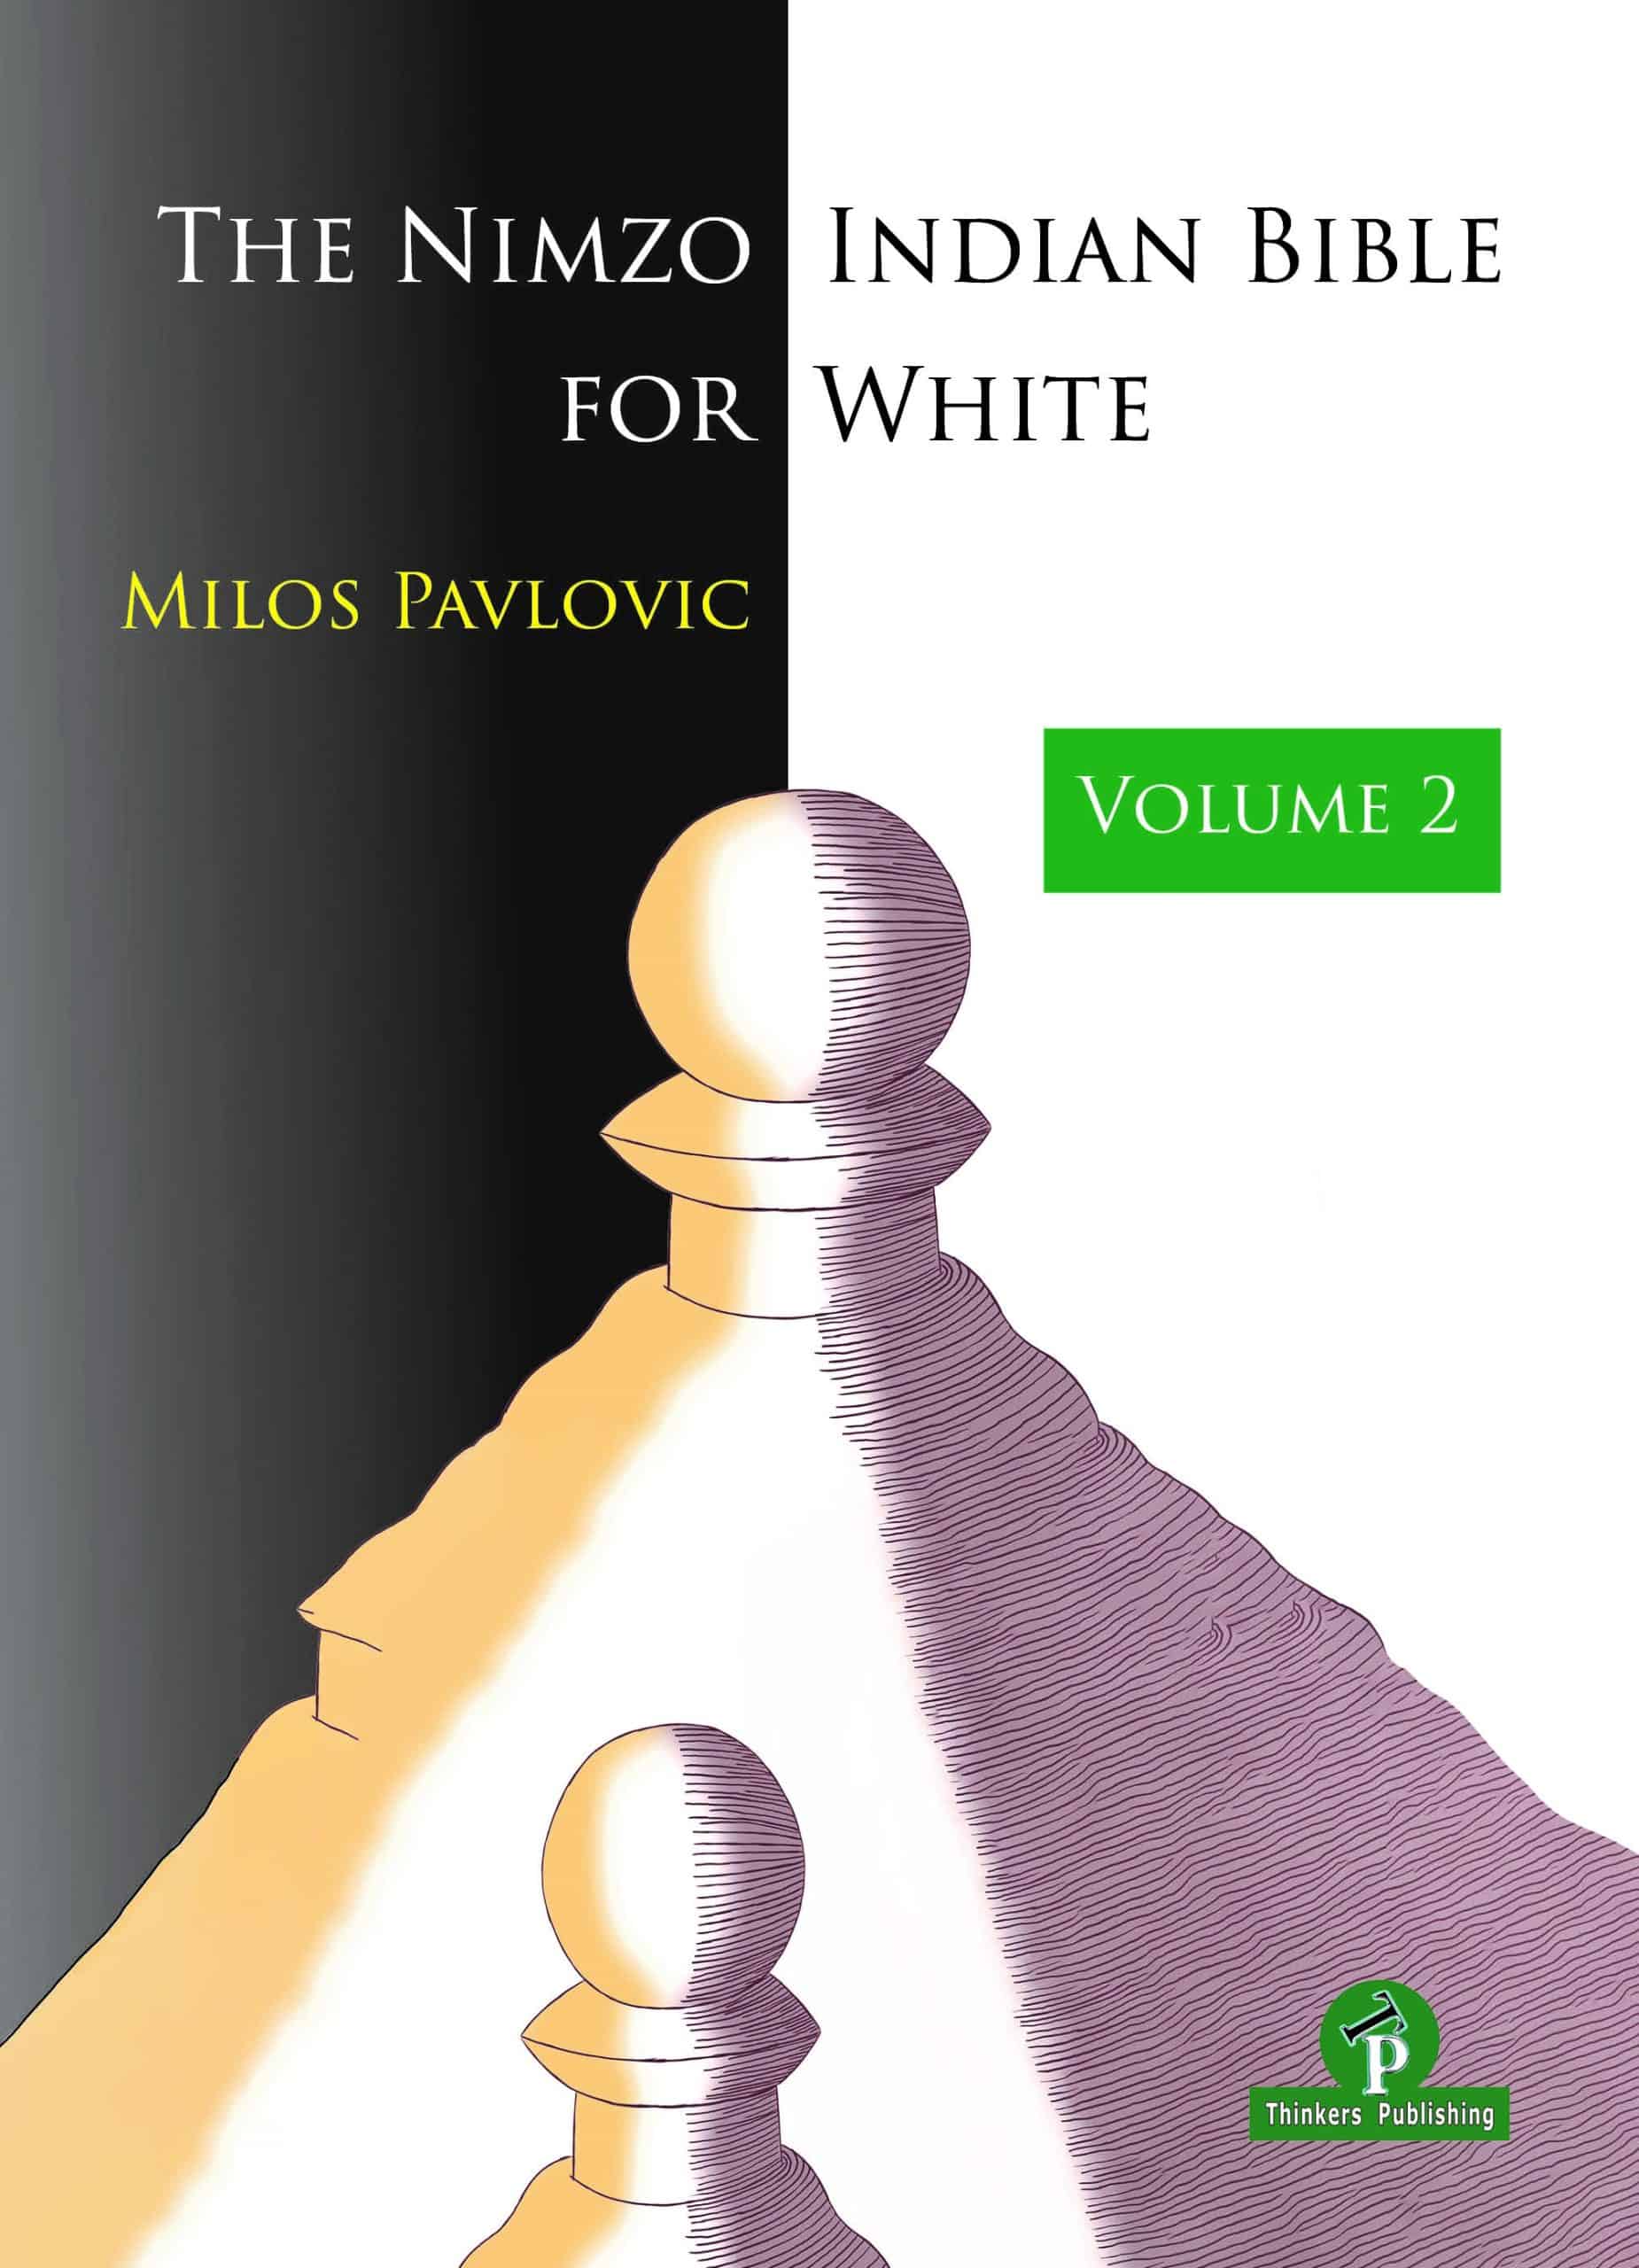 The Nimzo-Indian Bible for White – Volume 2